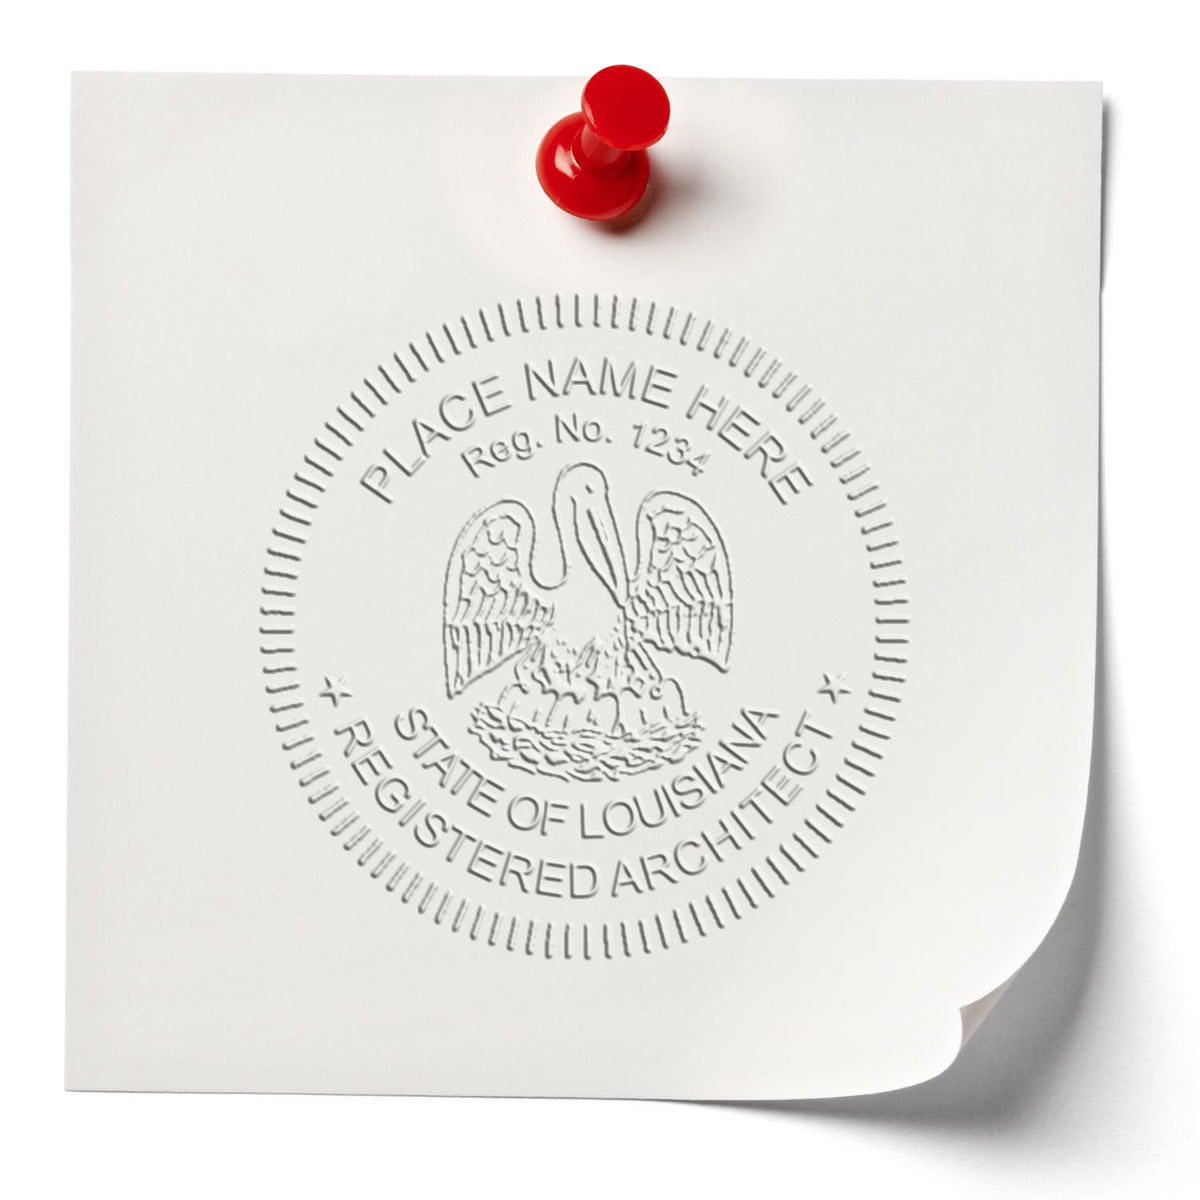 The State of Louisiana Architectural Seal Embosser stamp impression comes to life with a crisp, detailed photo on paper - showcasing true professional quality.